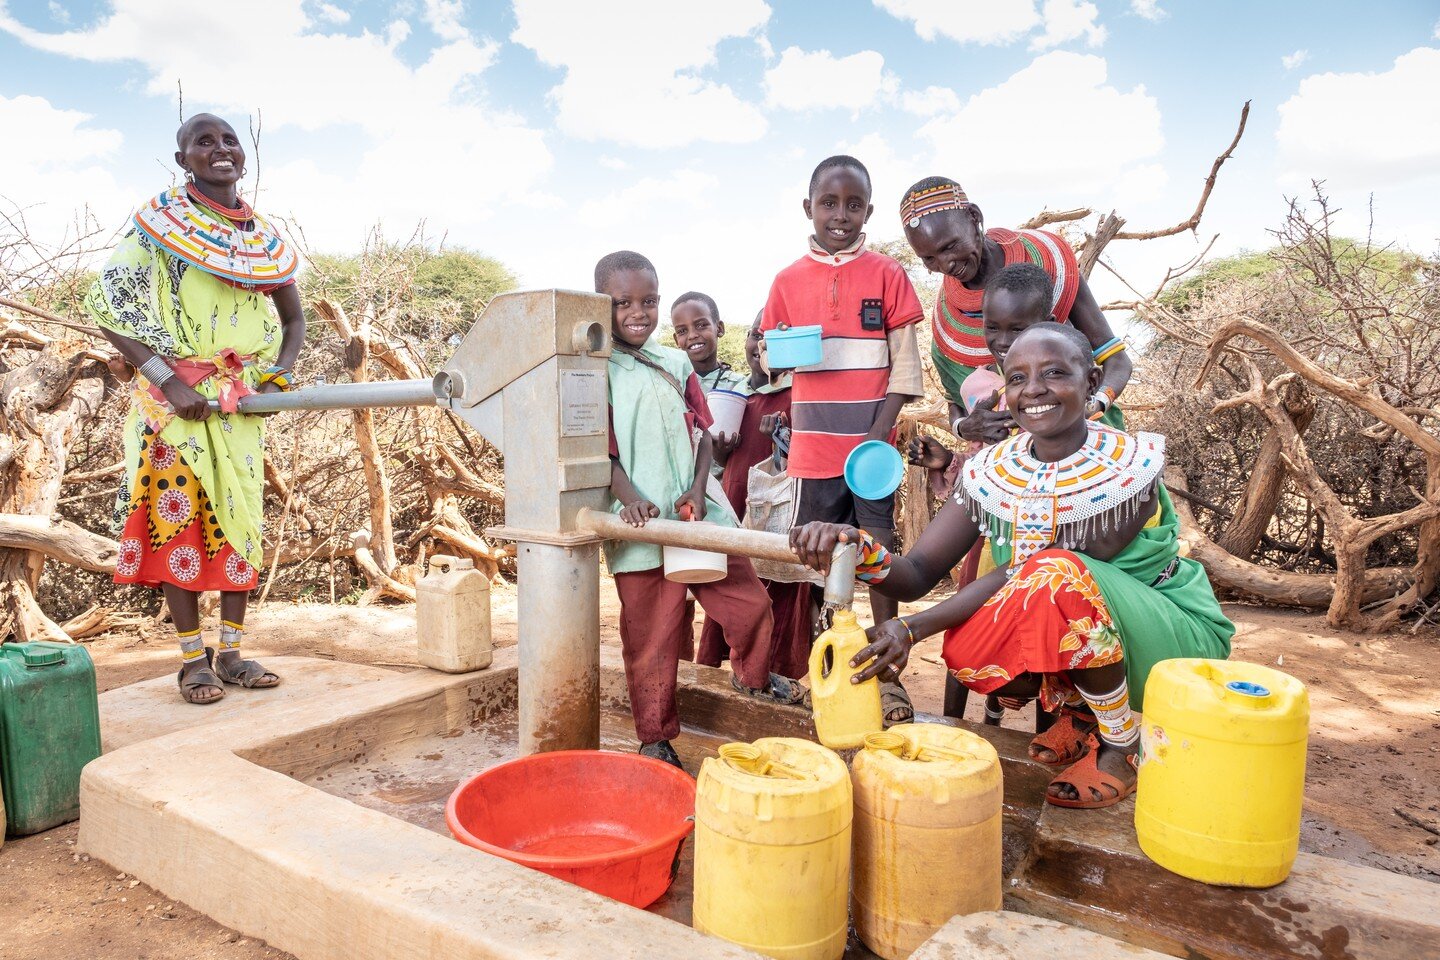 Life begins with water. Water provides the means for health, education, and community. Moreover, water is the foundation for empowerment, hope, and dignity. Since 2005, The Samburu Project has drilled 137 wells, supplying over 100,000 people with saf